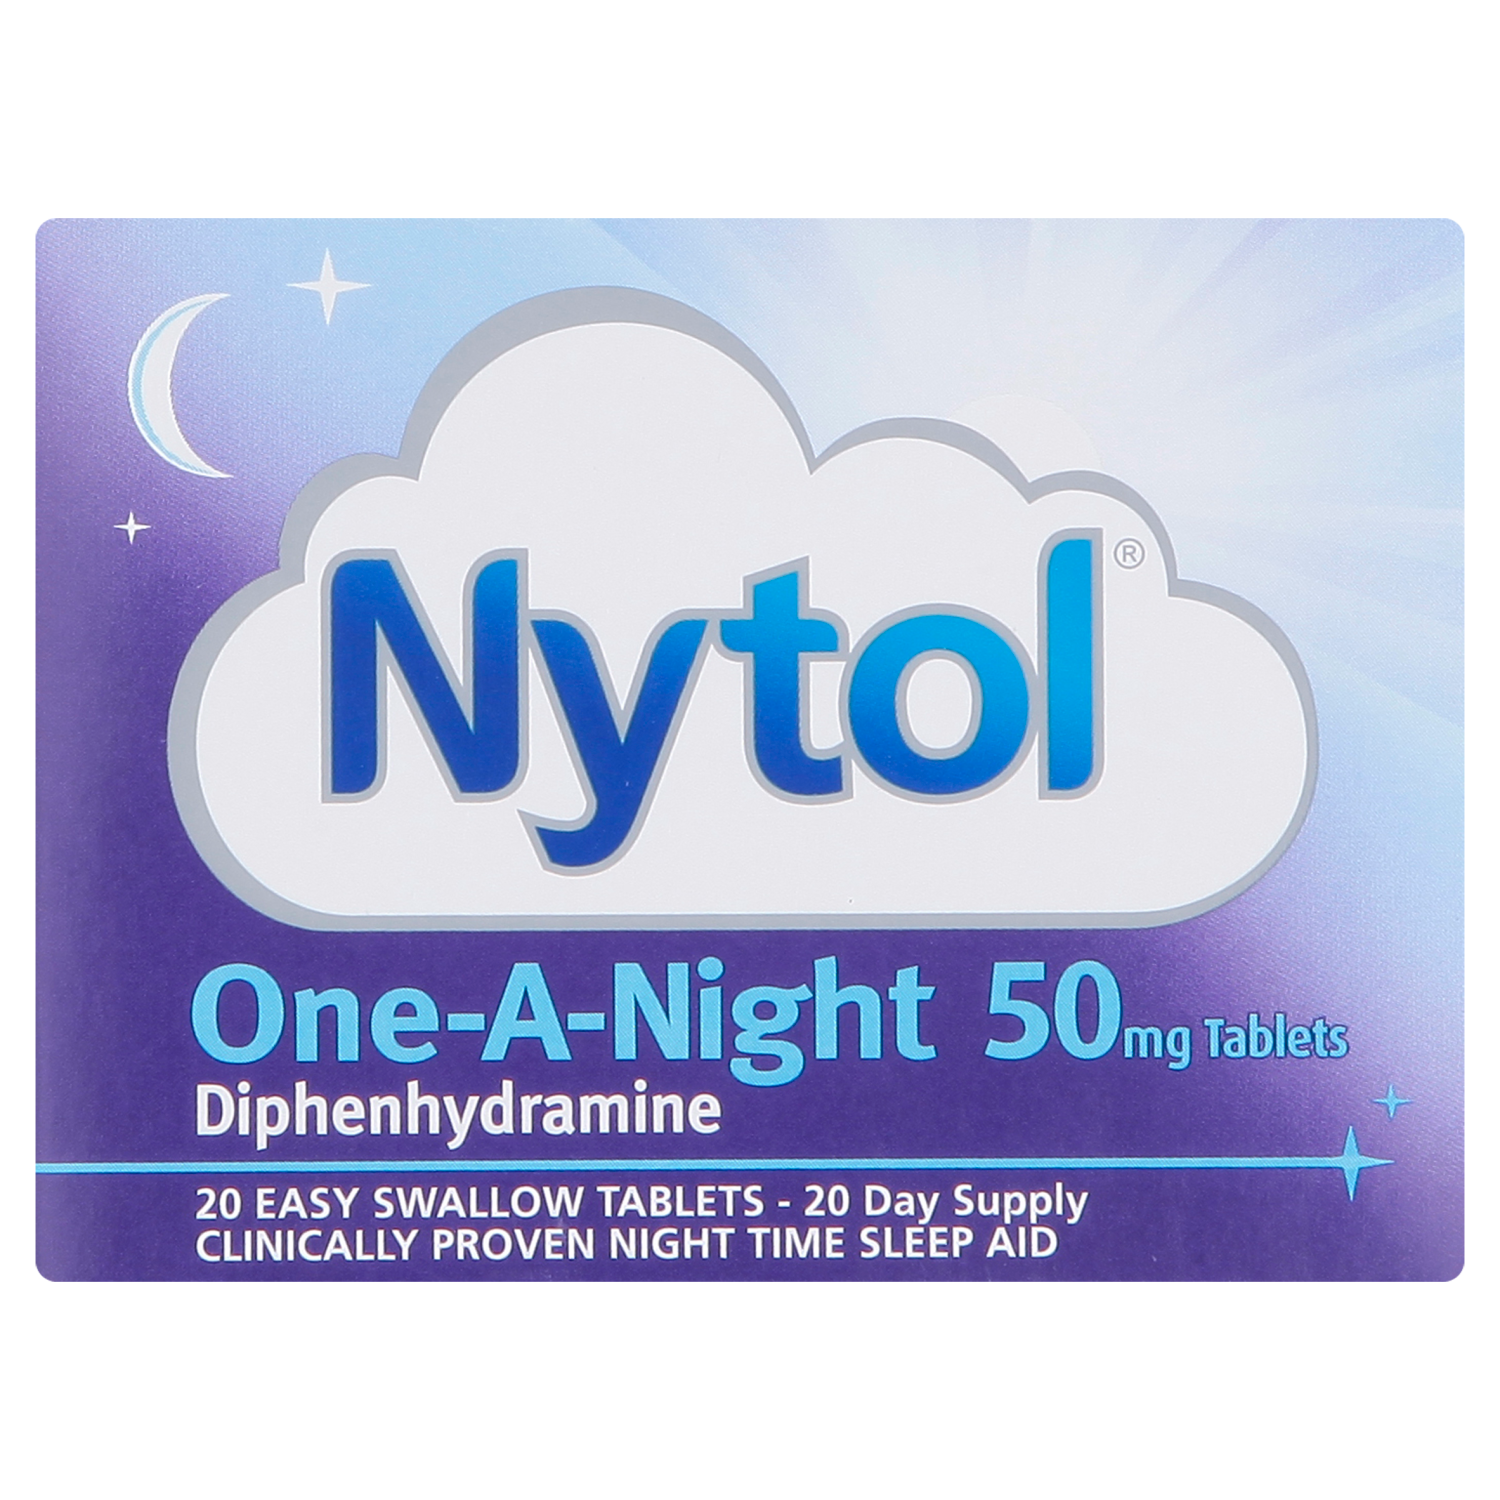 Nytol One-A-Night 50mg Tablets (20 Tablets)